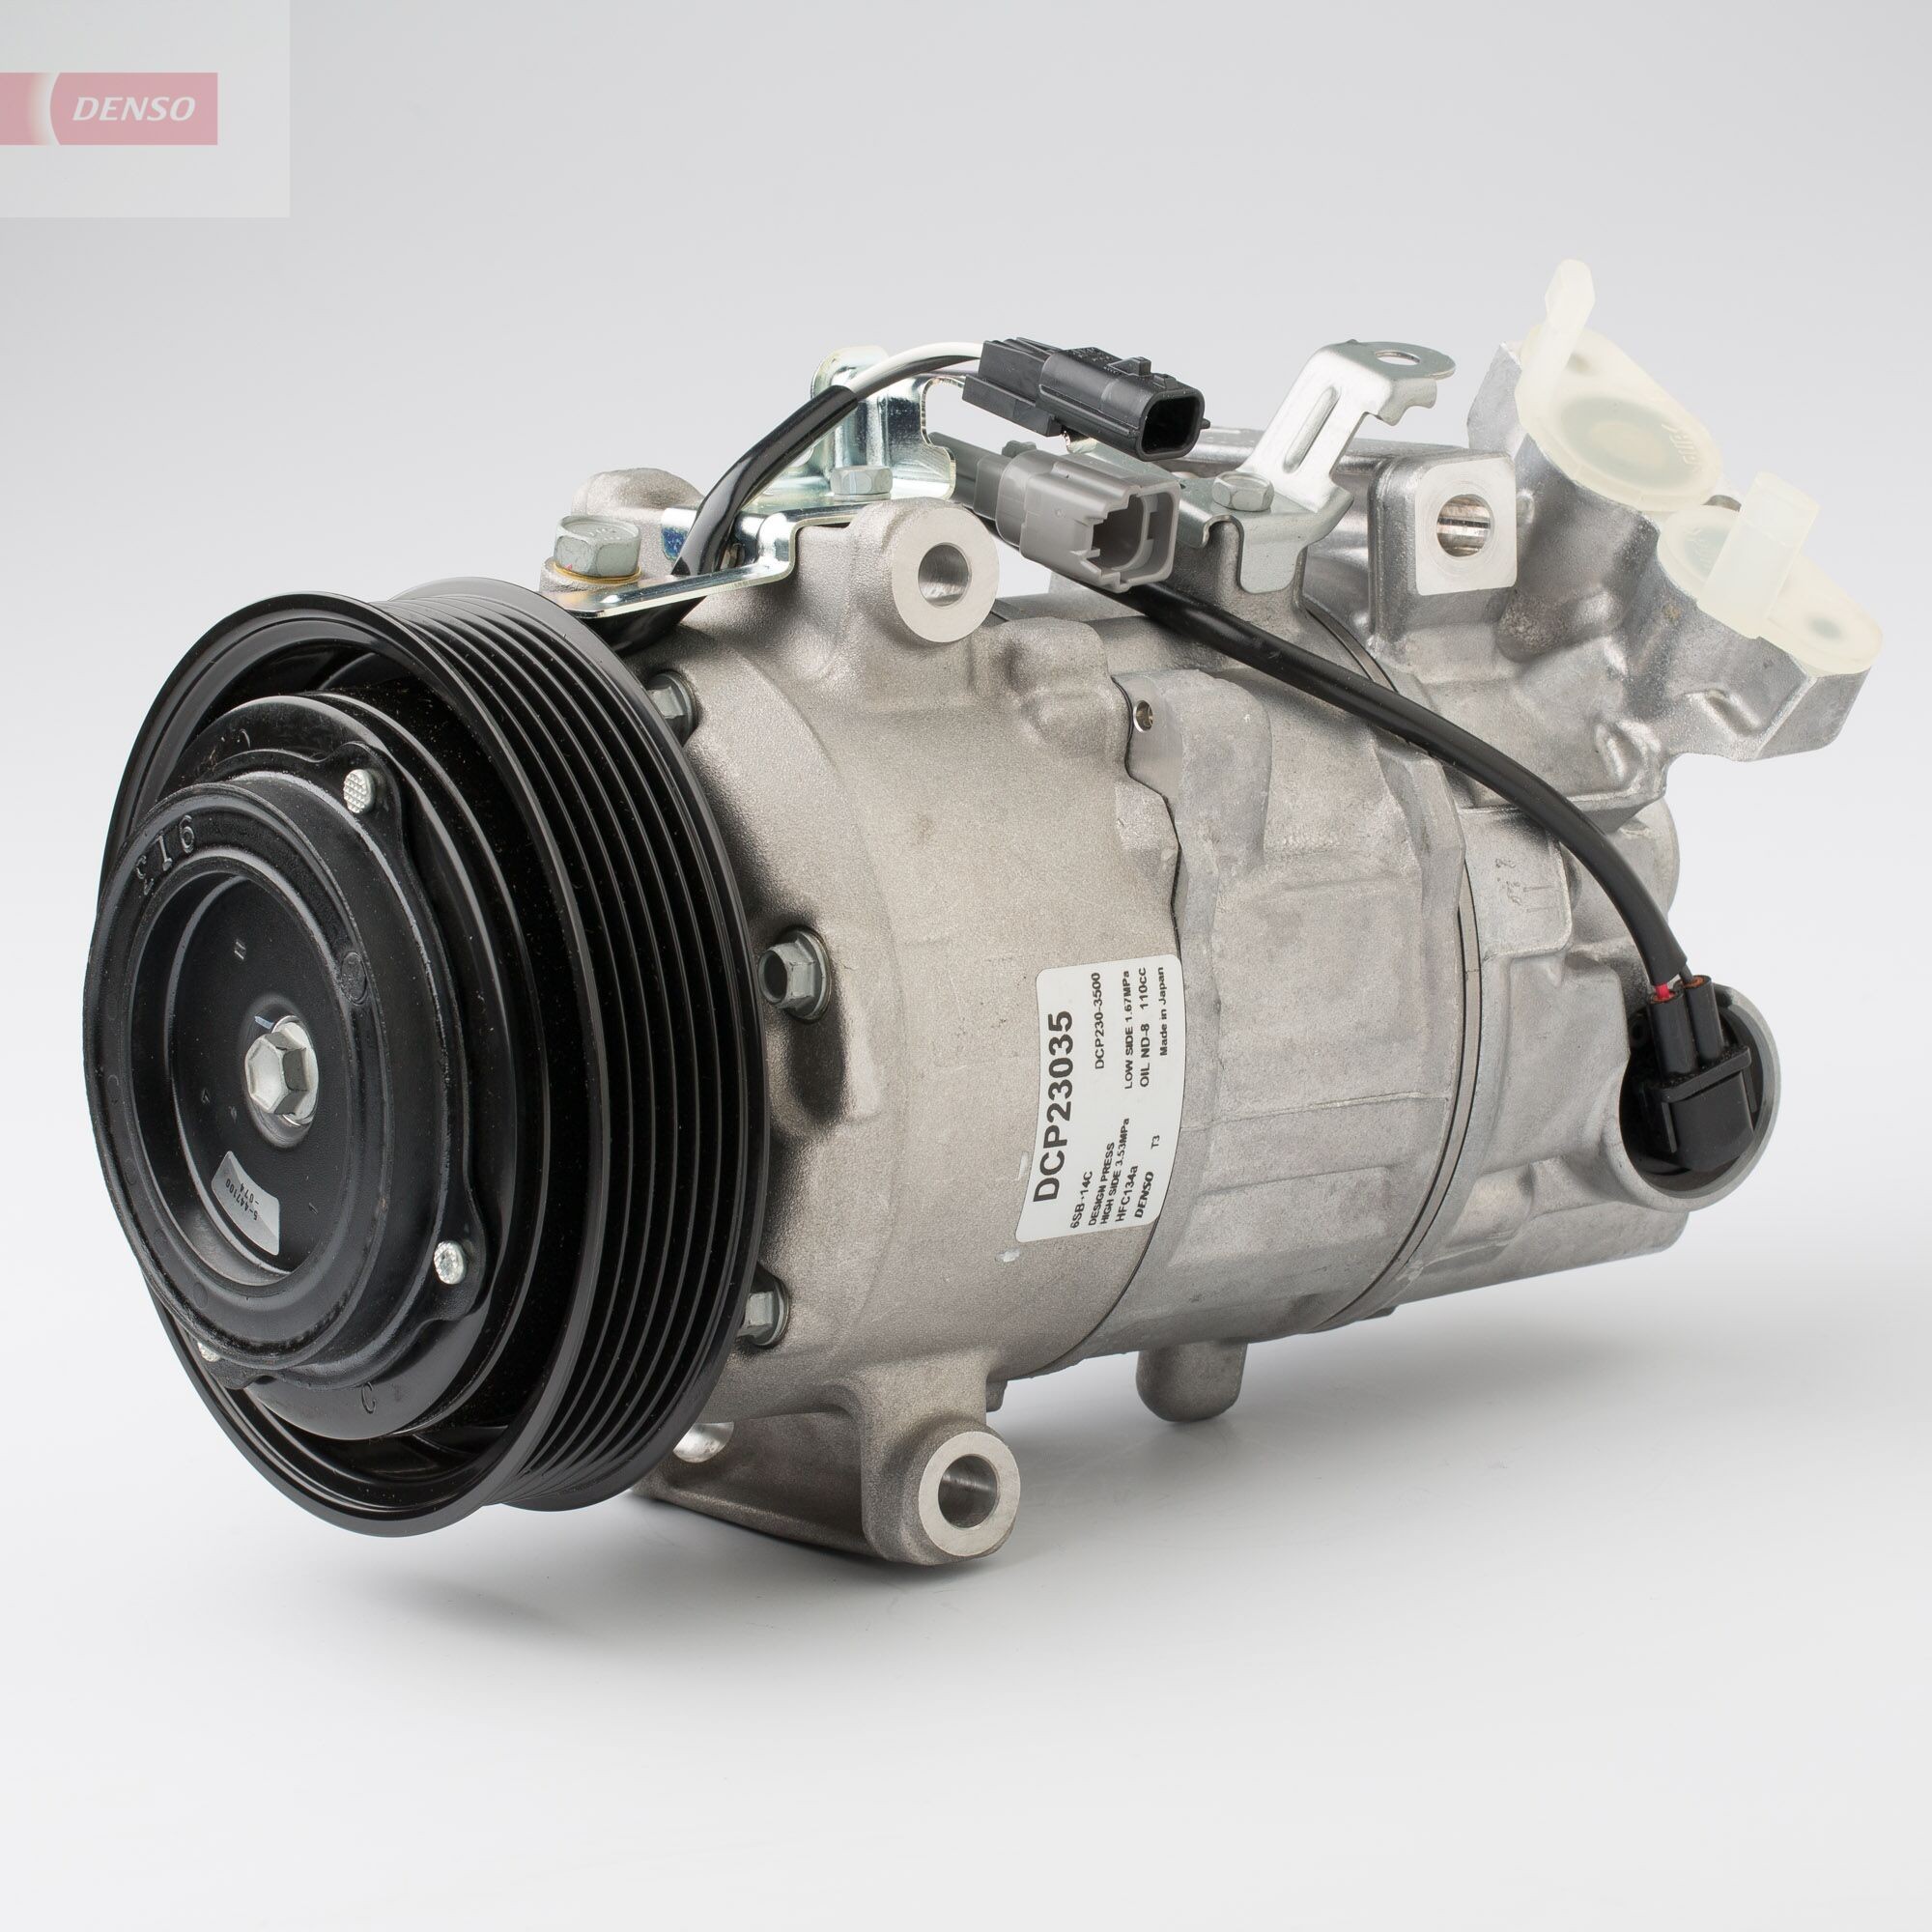 DENSO DCP23035 Air conditioning compressor 6SBL14C, 12V, PAG 46, R 134a, with magnetic clutch